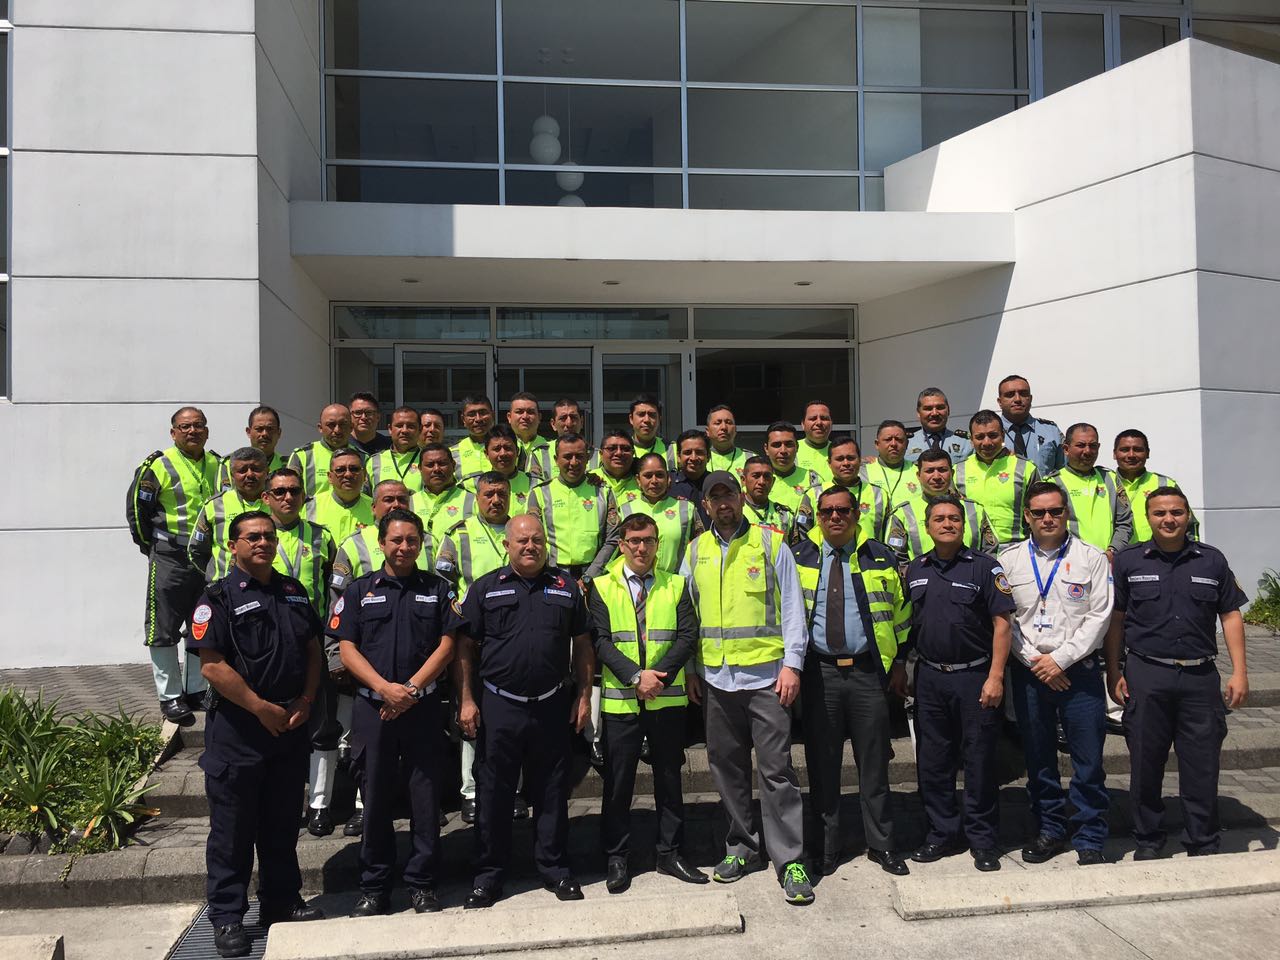 ZAKA International Rescue Unit Chief Officer Mati Goldstein (first row, wearing baseball cap) with representatives from Guatemala City fire department and search and rescue teams. Courtesy photo